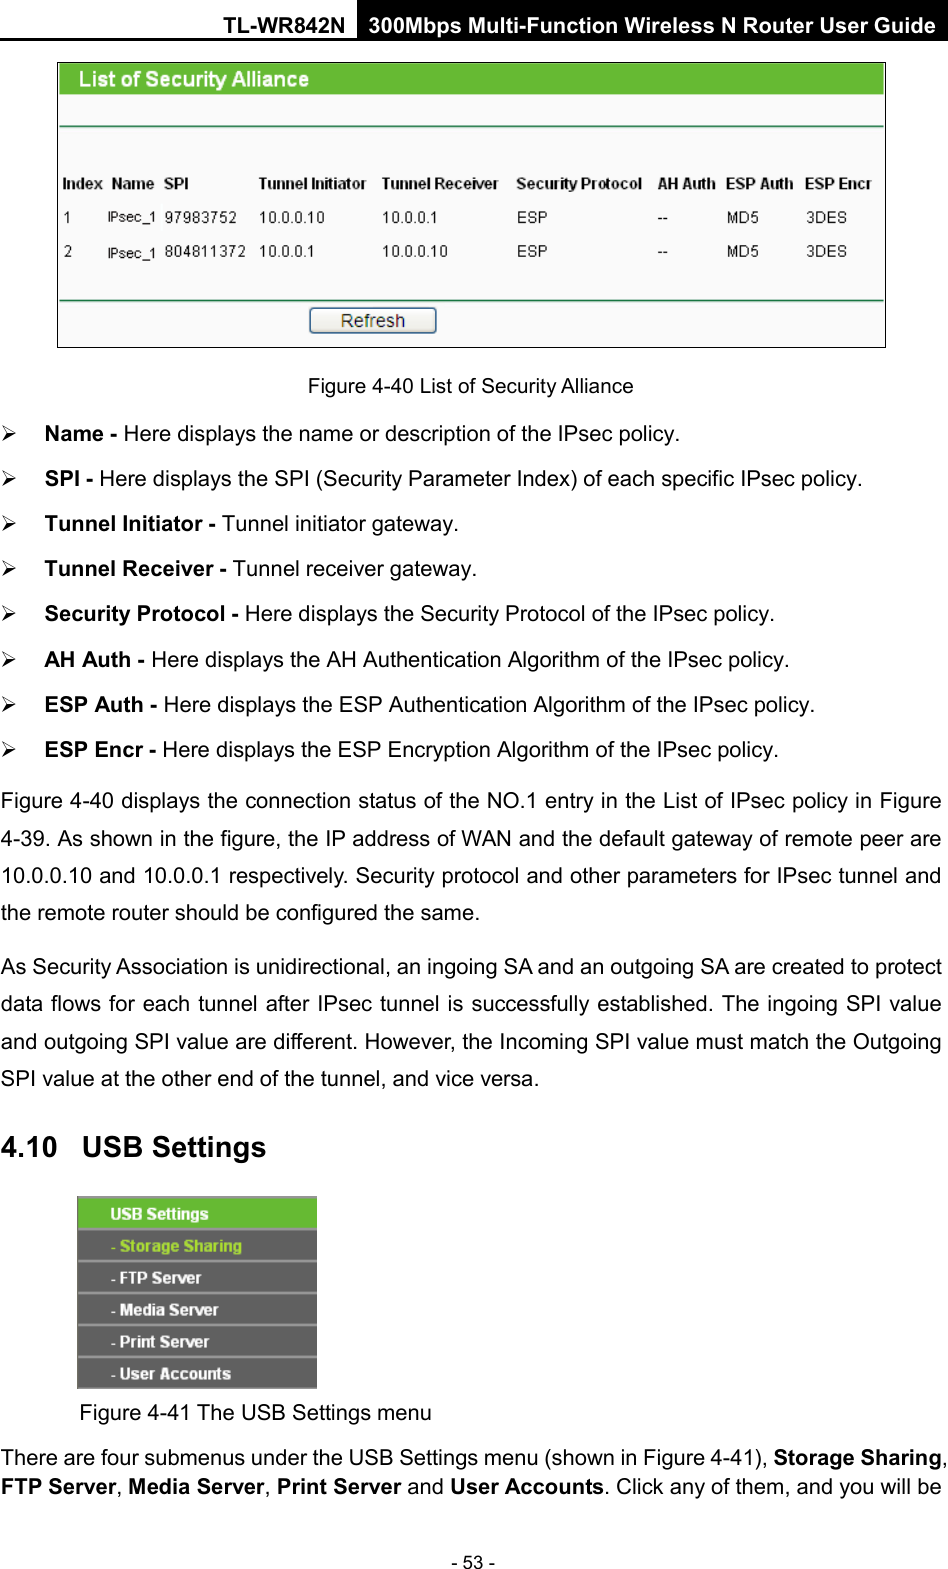 TL-WR842N 300Mbps Multi-Function Wireless N Router User Guide  - 53 -  Figure 4-40 List of Security Alliance  Name - Here displays the name or description of the IPsec policy.    SPI - Here displays the SPI (Security Parameter Index) of each specific IPsec policy.    Tunnel Initiator - Tunnel initiator gateway.    Tunnel Receiver - Tunnel receiver gateway.    Security Protocol - Here displays the Security Protocol of the IPsec policy.    AH Auth - Here displays the AH Authentication Algorithm of the IPsec policy.    ESP Auth - Here displays the ESP Authentication Algorithm of the IPsec policy.    ESP Encr - Here displays the ESP Encryption Algorithm of the IPsec policy.   Figure 4-40 displays the connection status of the NO.1 entry in the List of IPsec policy in Figure 4-39. As shown in the figure, the IP address of WAN and the default gateway of remote peer are 10.0.0.10 and 10.0.0.1 respectively. Security protocol and other parameters for IPsec tunnel and the remote router should be configured the same. As Security Association is unidirectional, an ingoing SA and an outgoing SA are created to protect data flows for each tunnel after IPsec tunnel is successfully established. The ingoing SPI value and outgoing SPI value are different. However, the Incoming SPI value must match the Outgoing SPI value at the other end of the tunnel, and vice versa.   4.10  USB Settings  Figure 4-41 The USB Settings menu There are four submenus under the USB Settings menu (shown in Figure 4-41), Storage Sharing, FTP Server, Media Server, Print Server and User Accounts. Click any of them, and you will be 